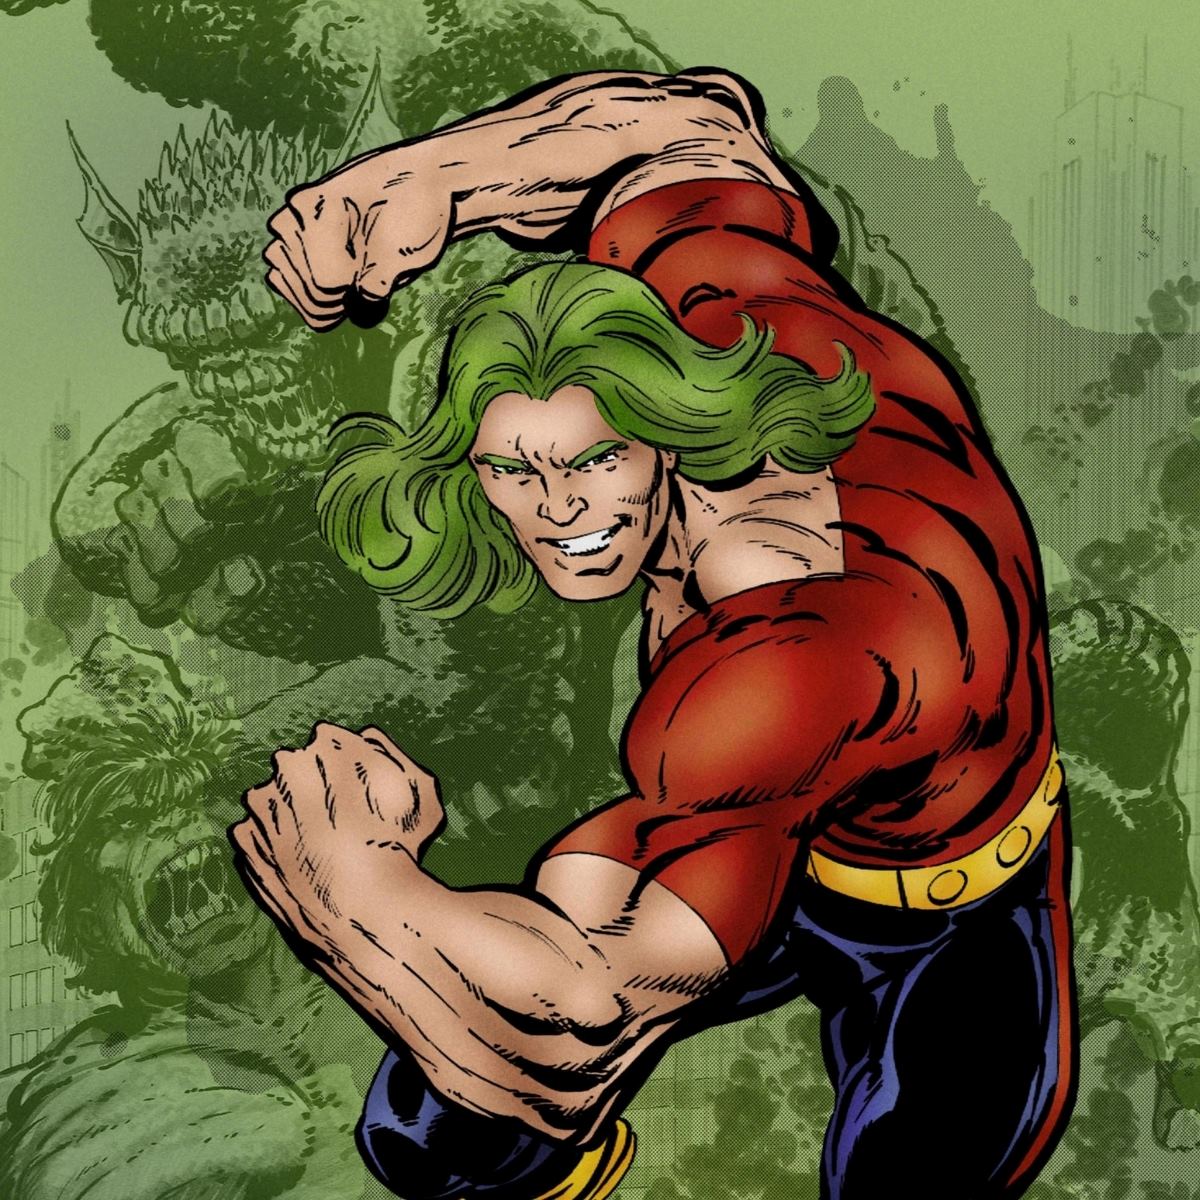 21-facts-about-doc-samson-the-avengers-earths-mightiest-heroes